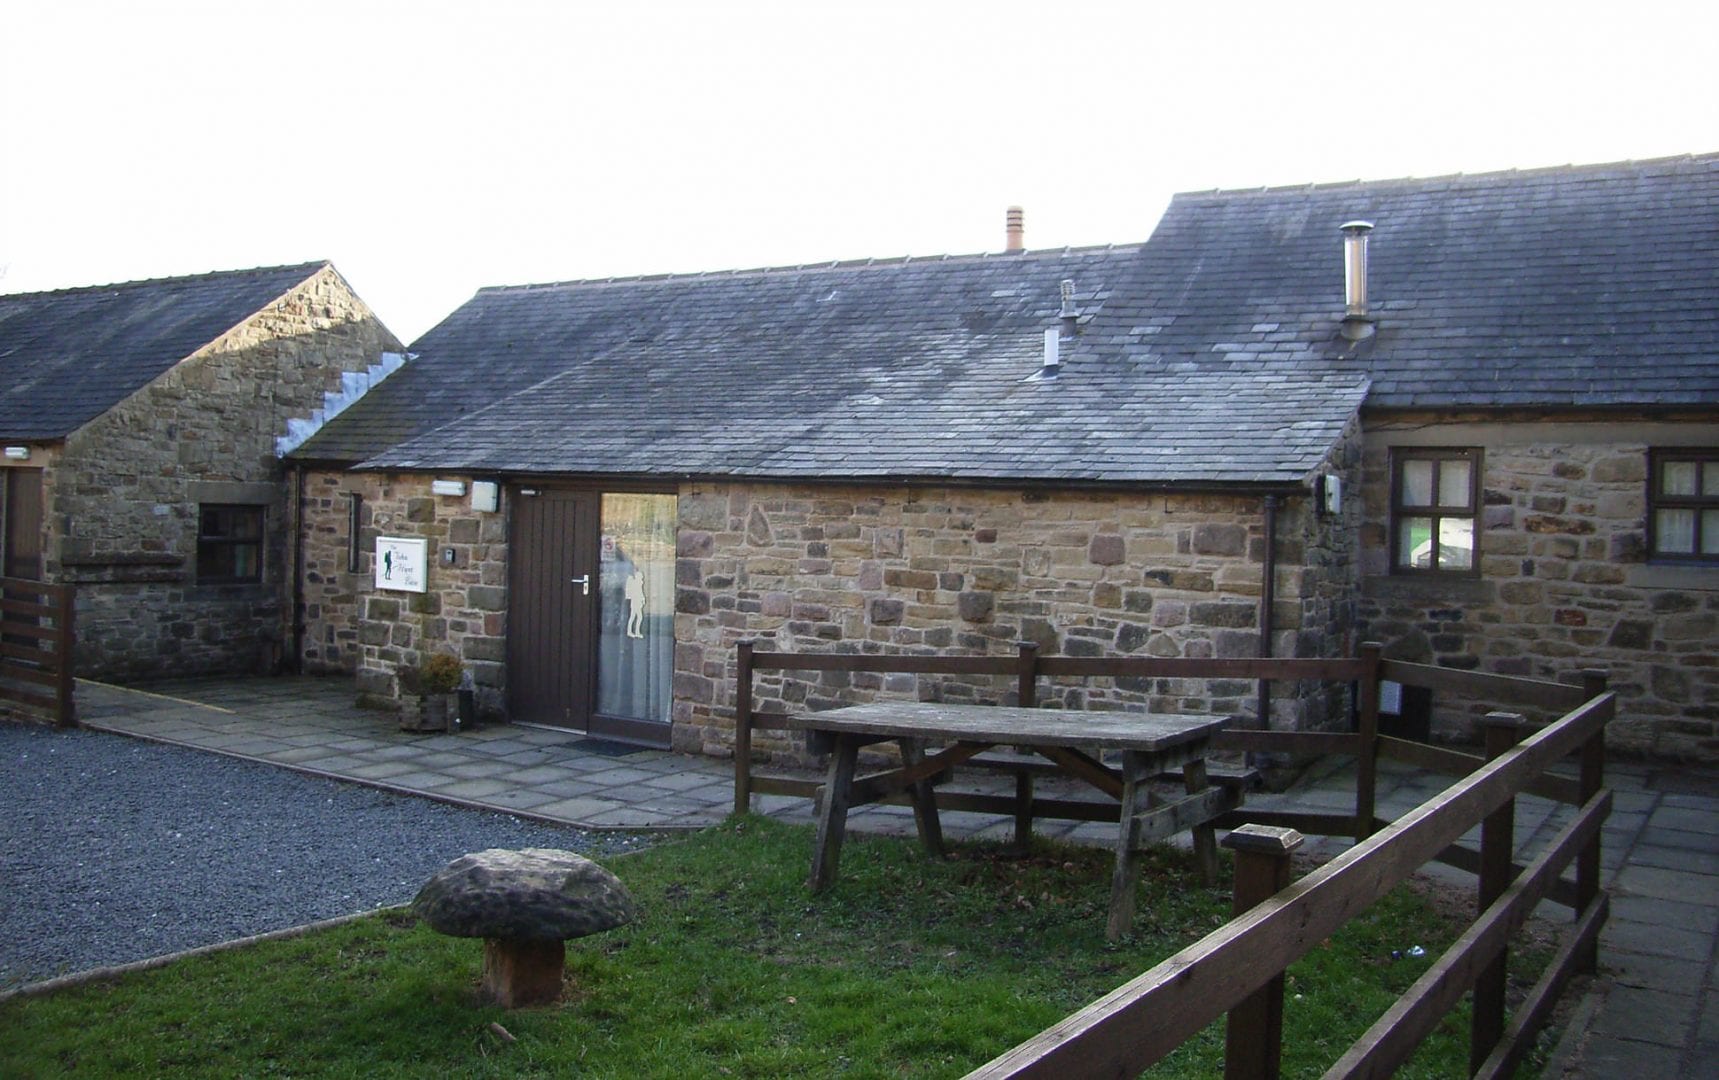 John Hunt Centre group accommodation at Hagg Farm in the peaks